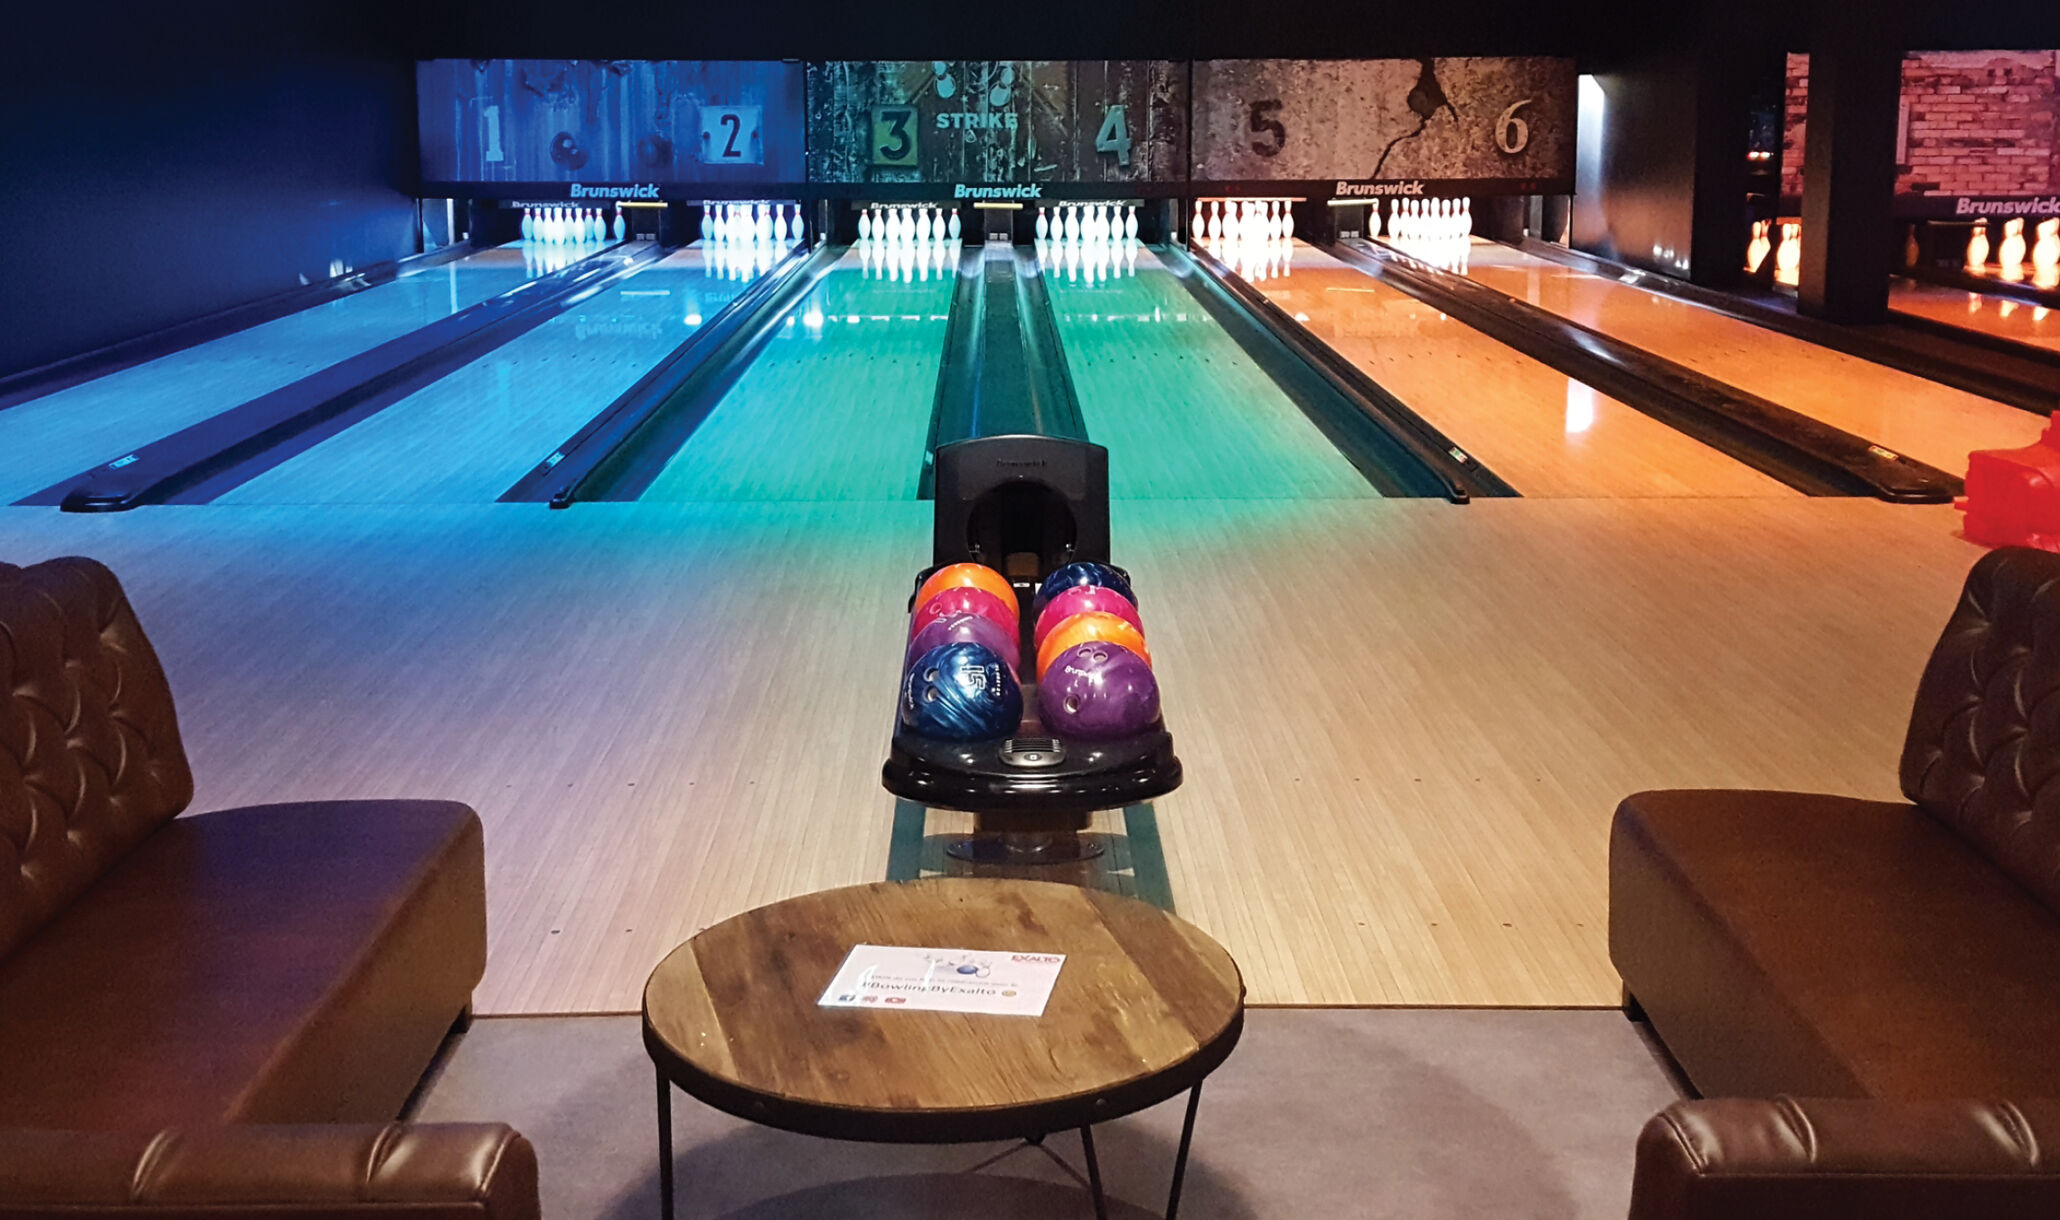 Bowling by Exalto, Dardilly, France - At the lanes-1